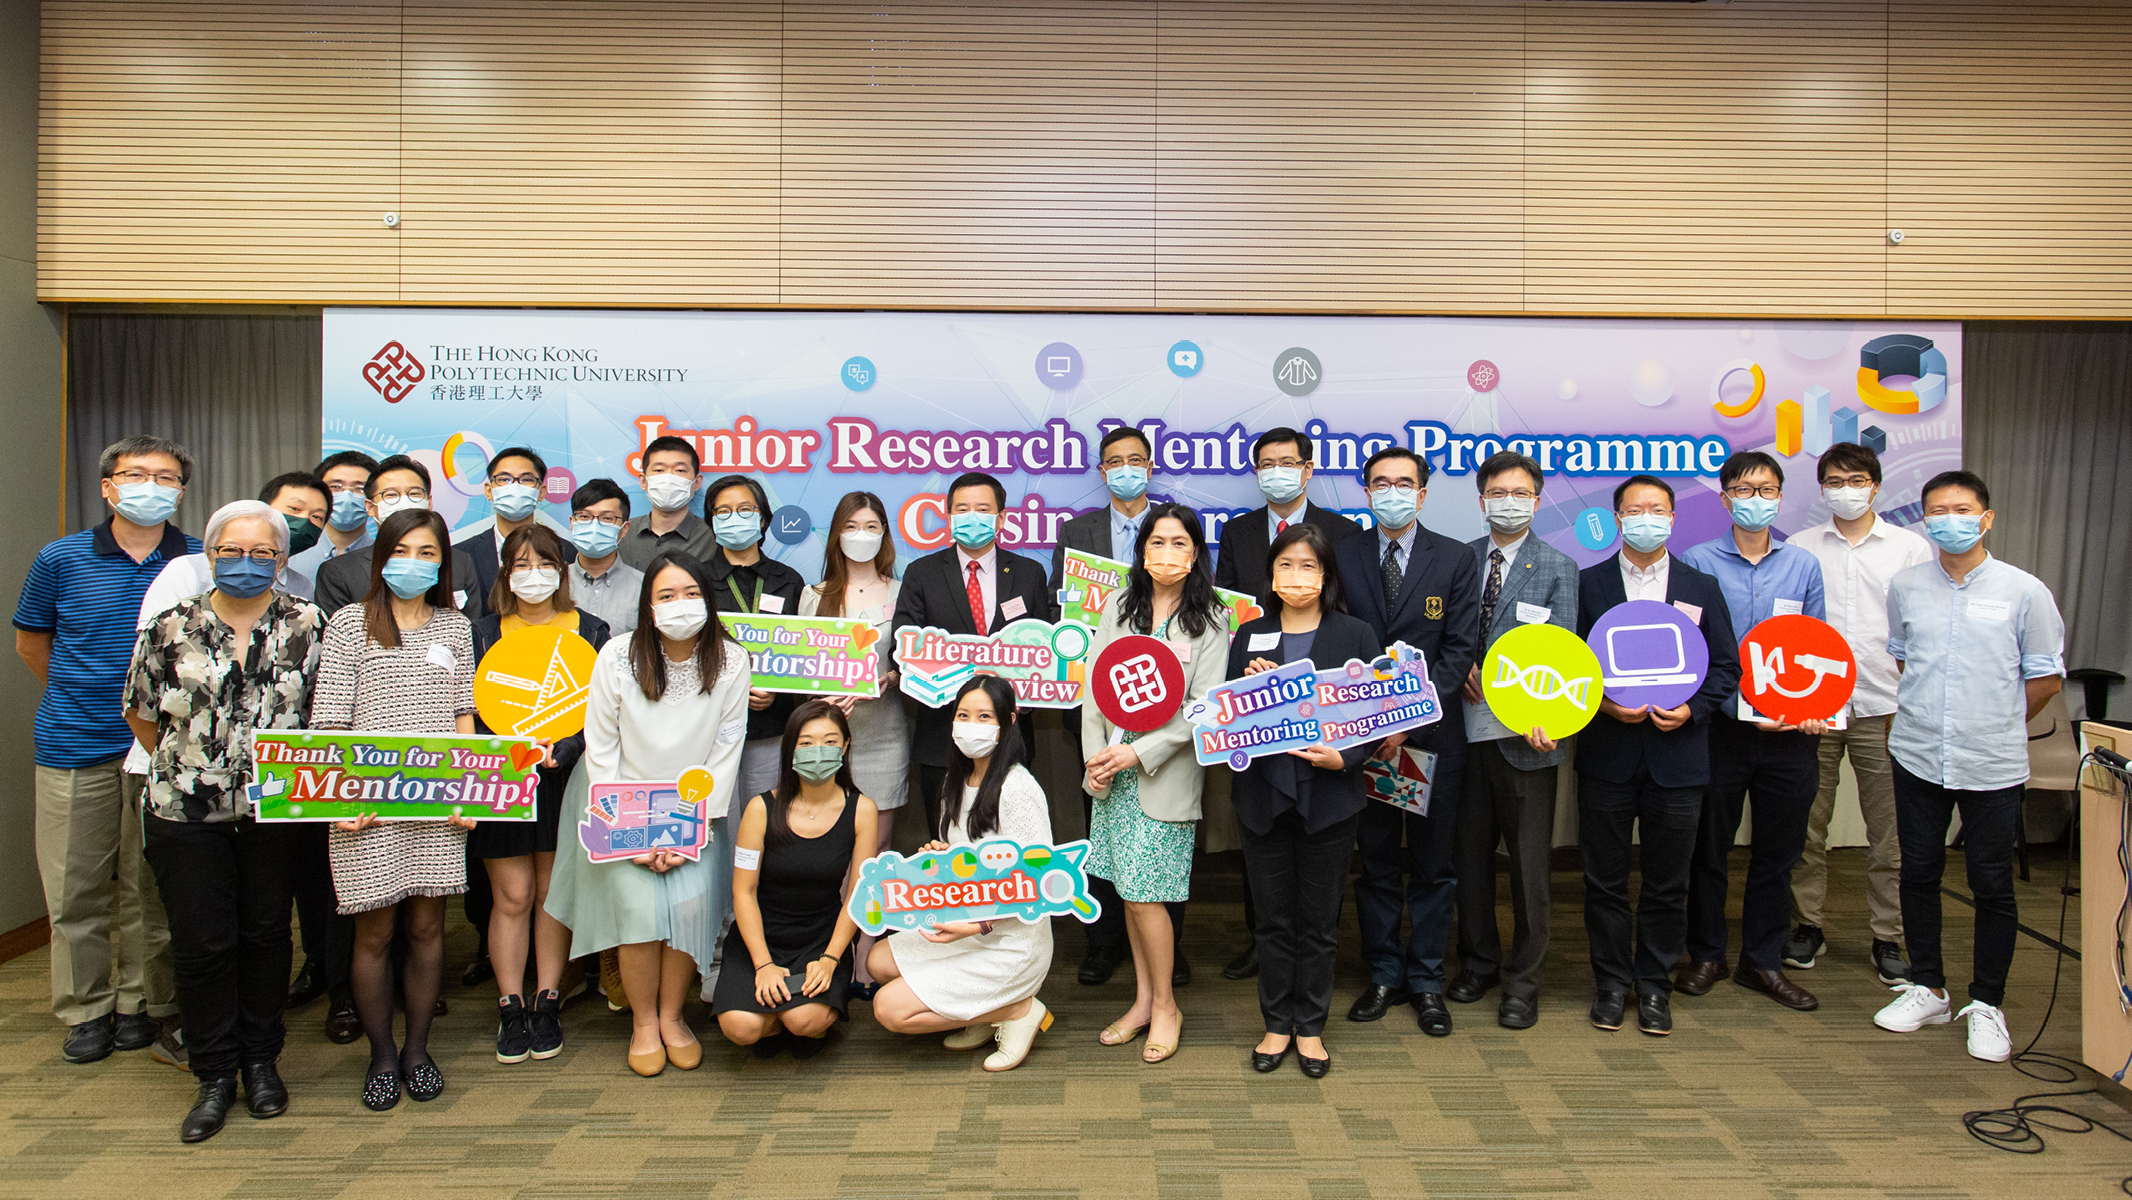 PolyU launches the Junior Research Mentoring Programme to deepen understanding of research work among young people under the guidance of experienced academics.